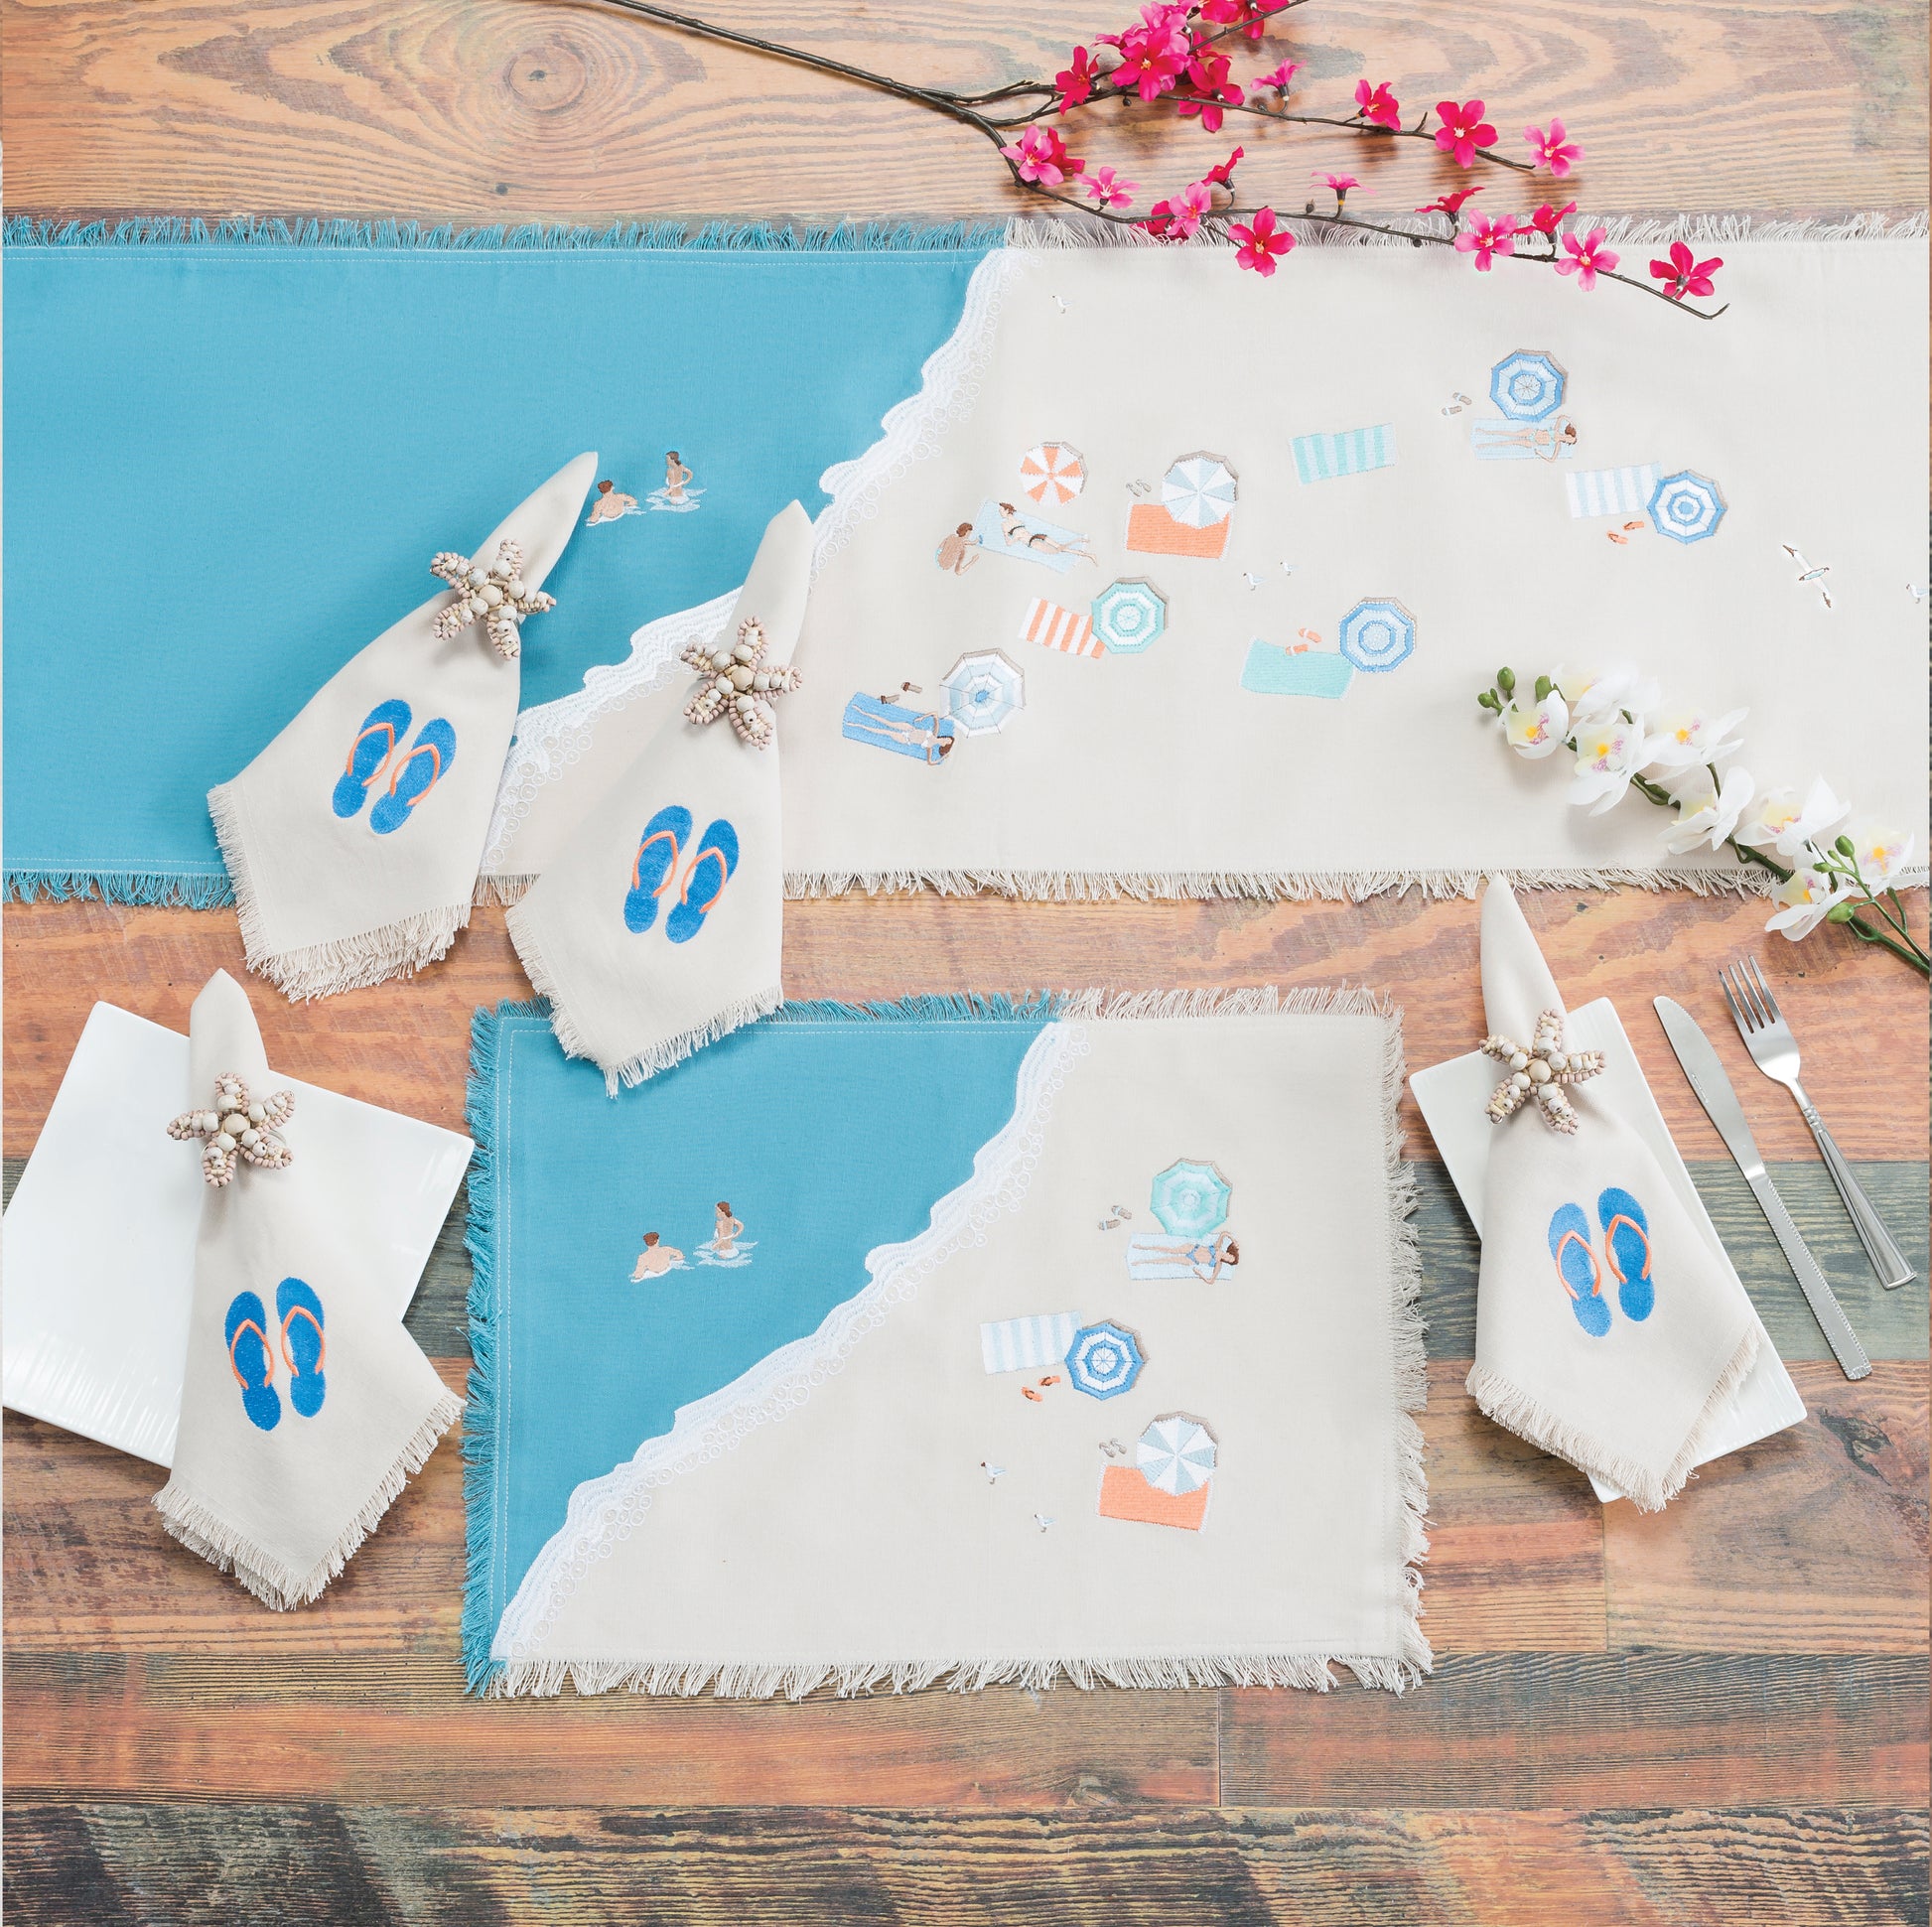 Colorful beach umbrellas, towels, and sun bathers embroidered on a sandy beach scene of natural and blue cotton on a fringed table runner and placemat. Napkins featuring embroidered flip flops not available. 